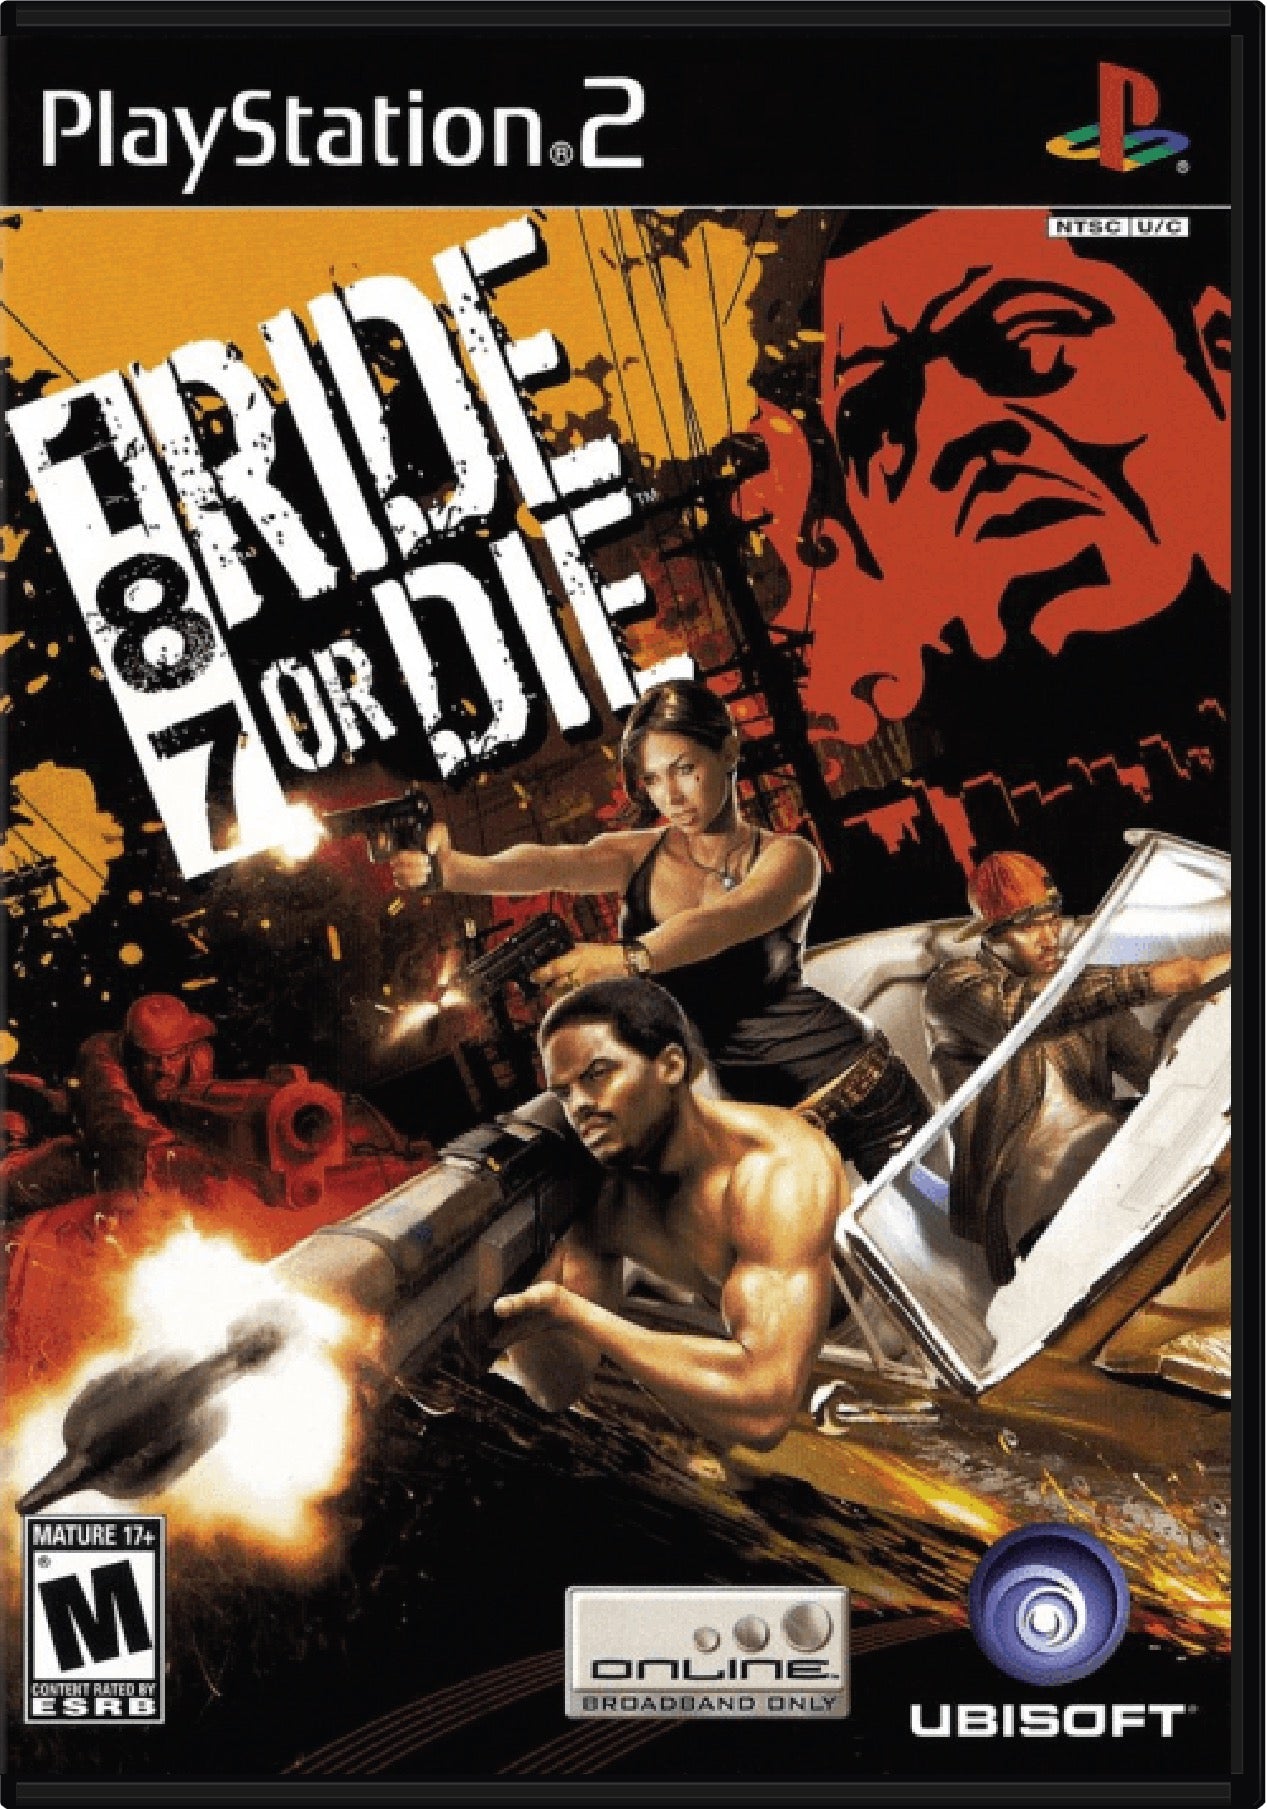 187 Ride or Die Cover Art and Product Photo